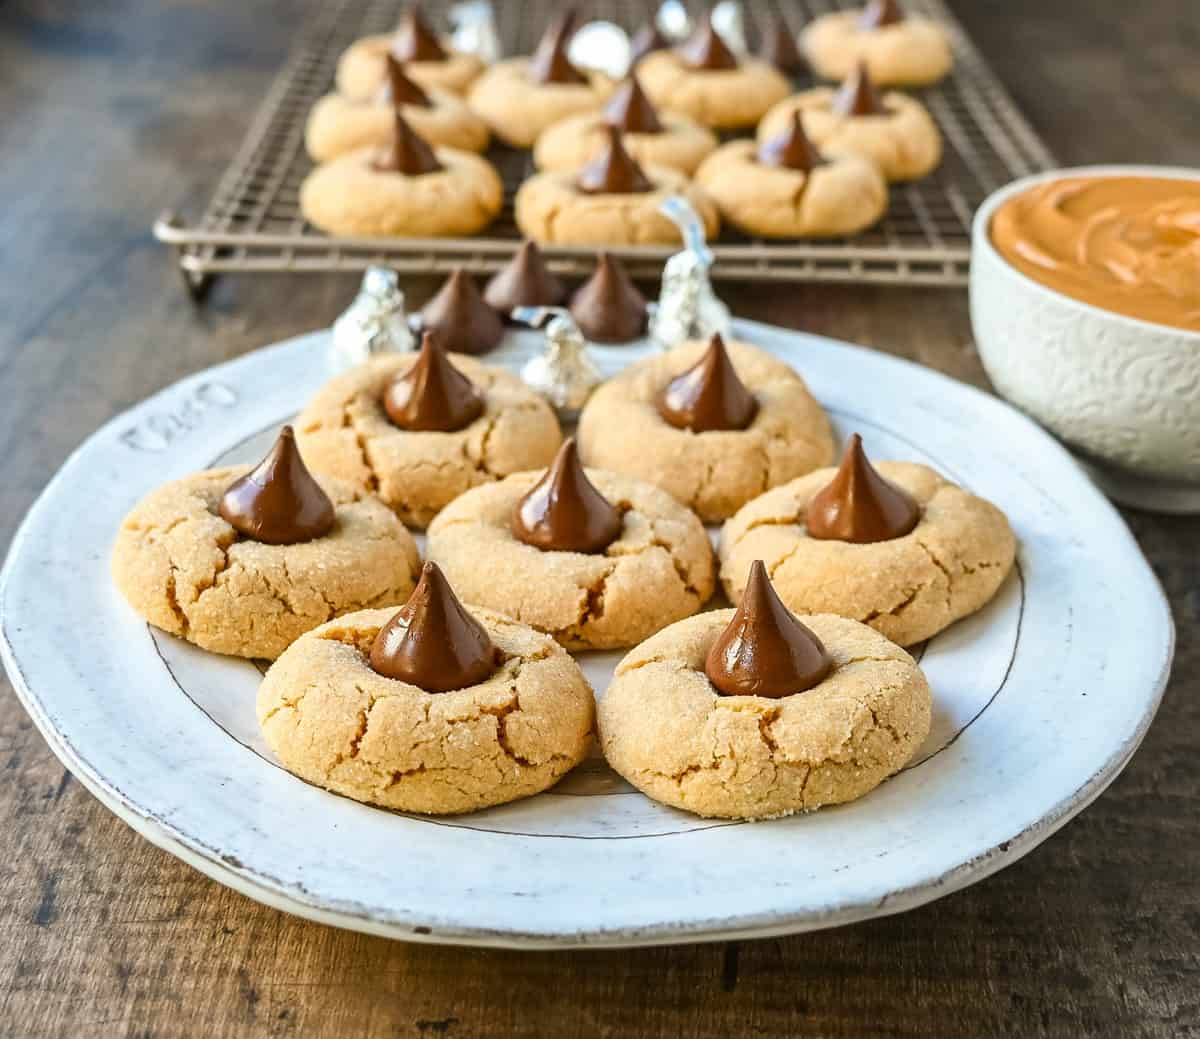 Easy Peanut Butter Blossoms. This popular soft and chewy peanut butter cookie with a Hershey's chocolate kiss in the center is the classic Christmas cookie. This recipe has been in my family for over 60 years and is the best peanut butter blossom recipe.